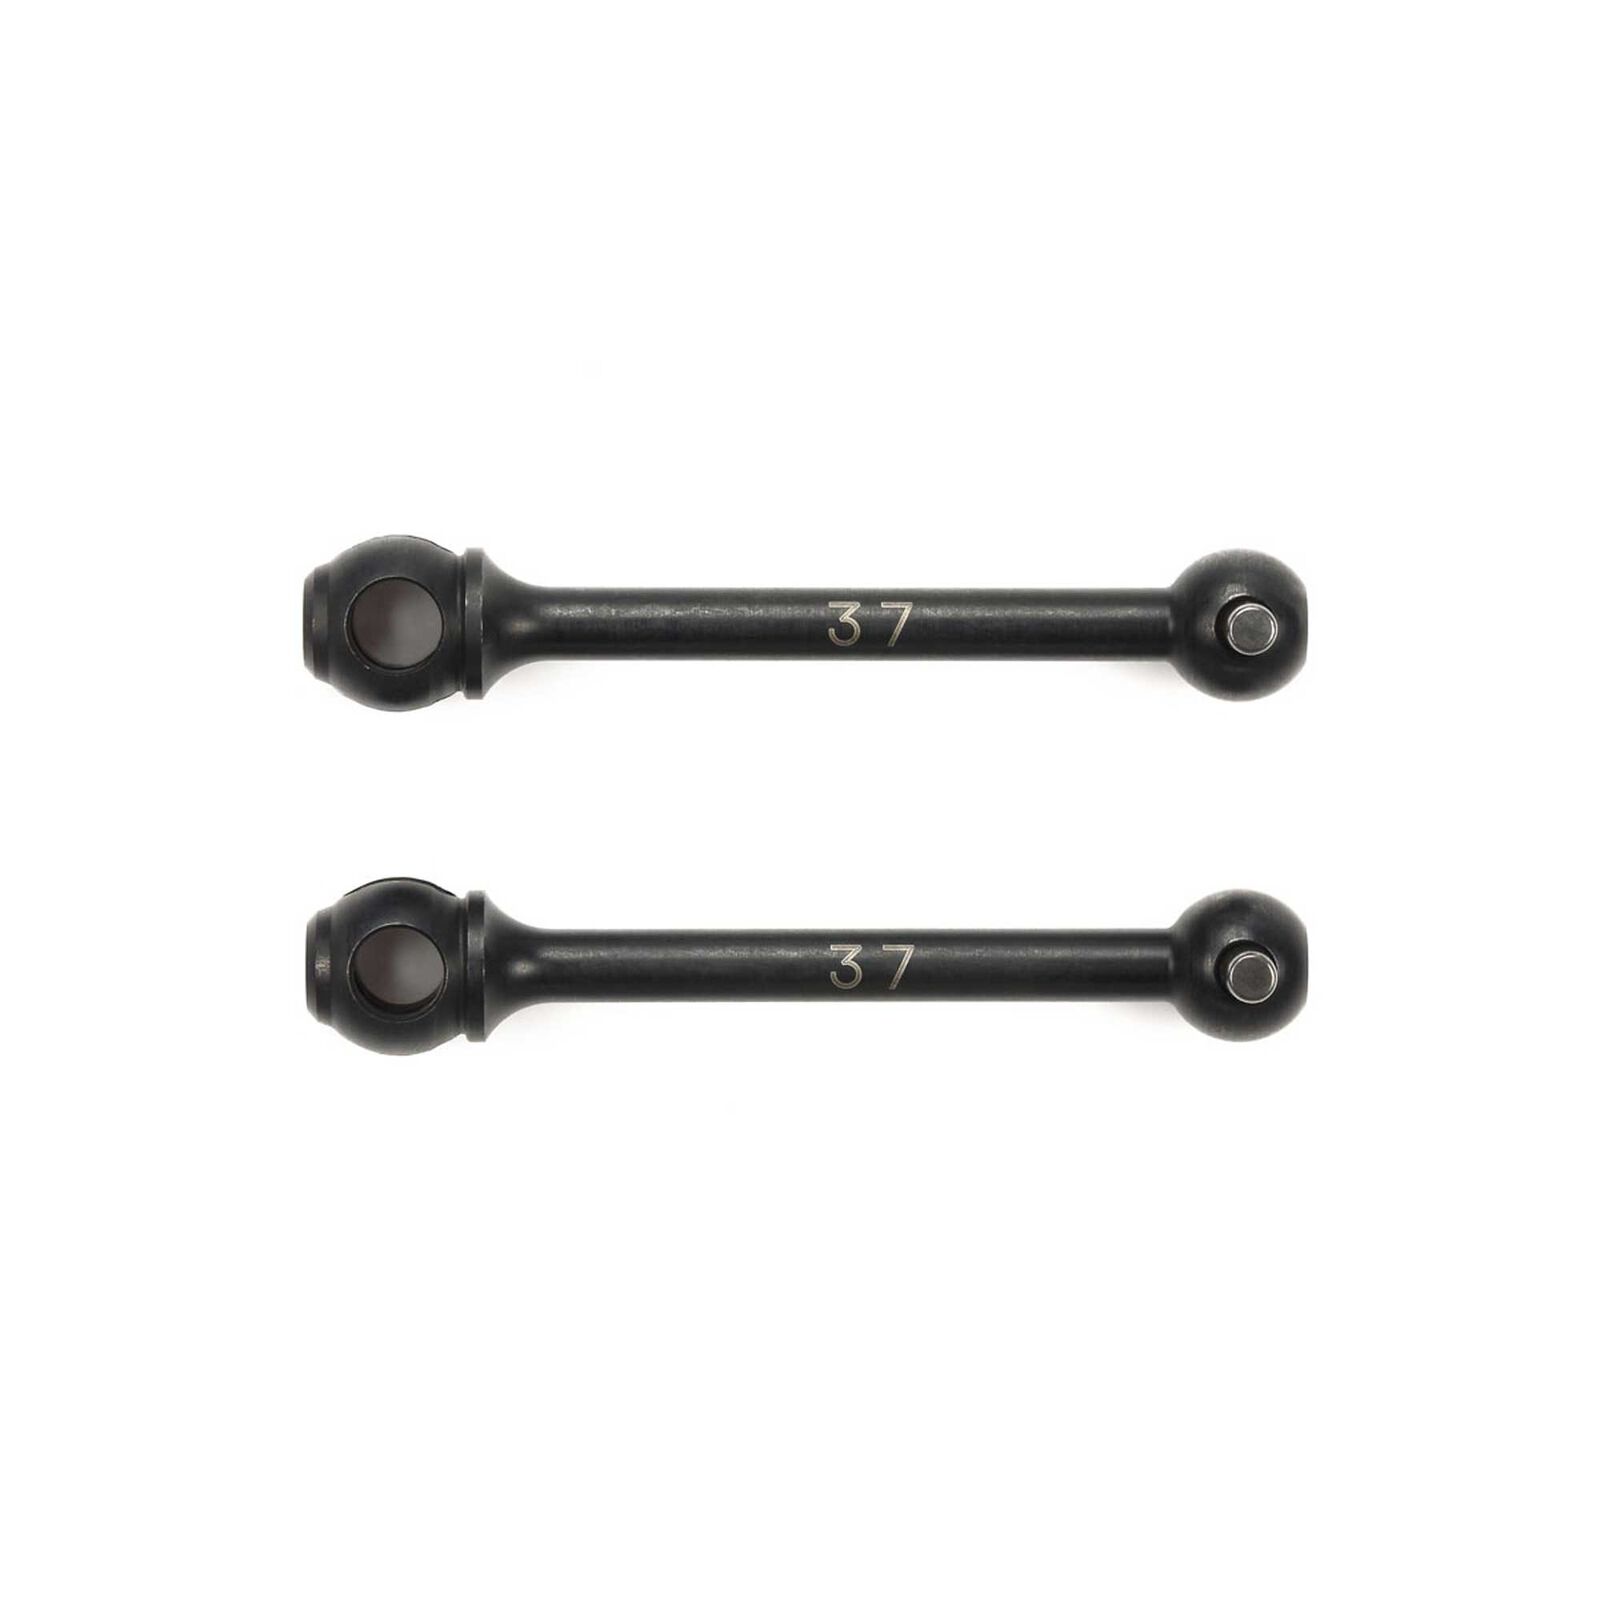 37mm Drive Shafts: Double Cardan Joint Shafts 2pc